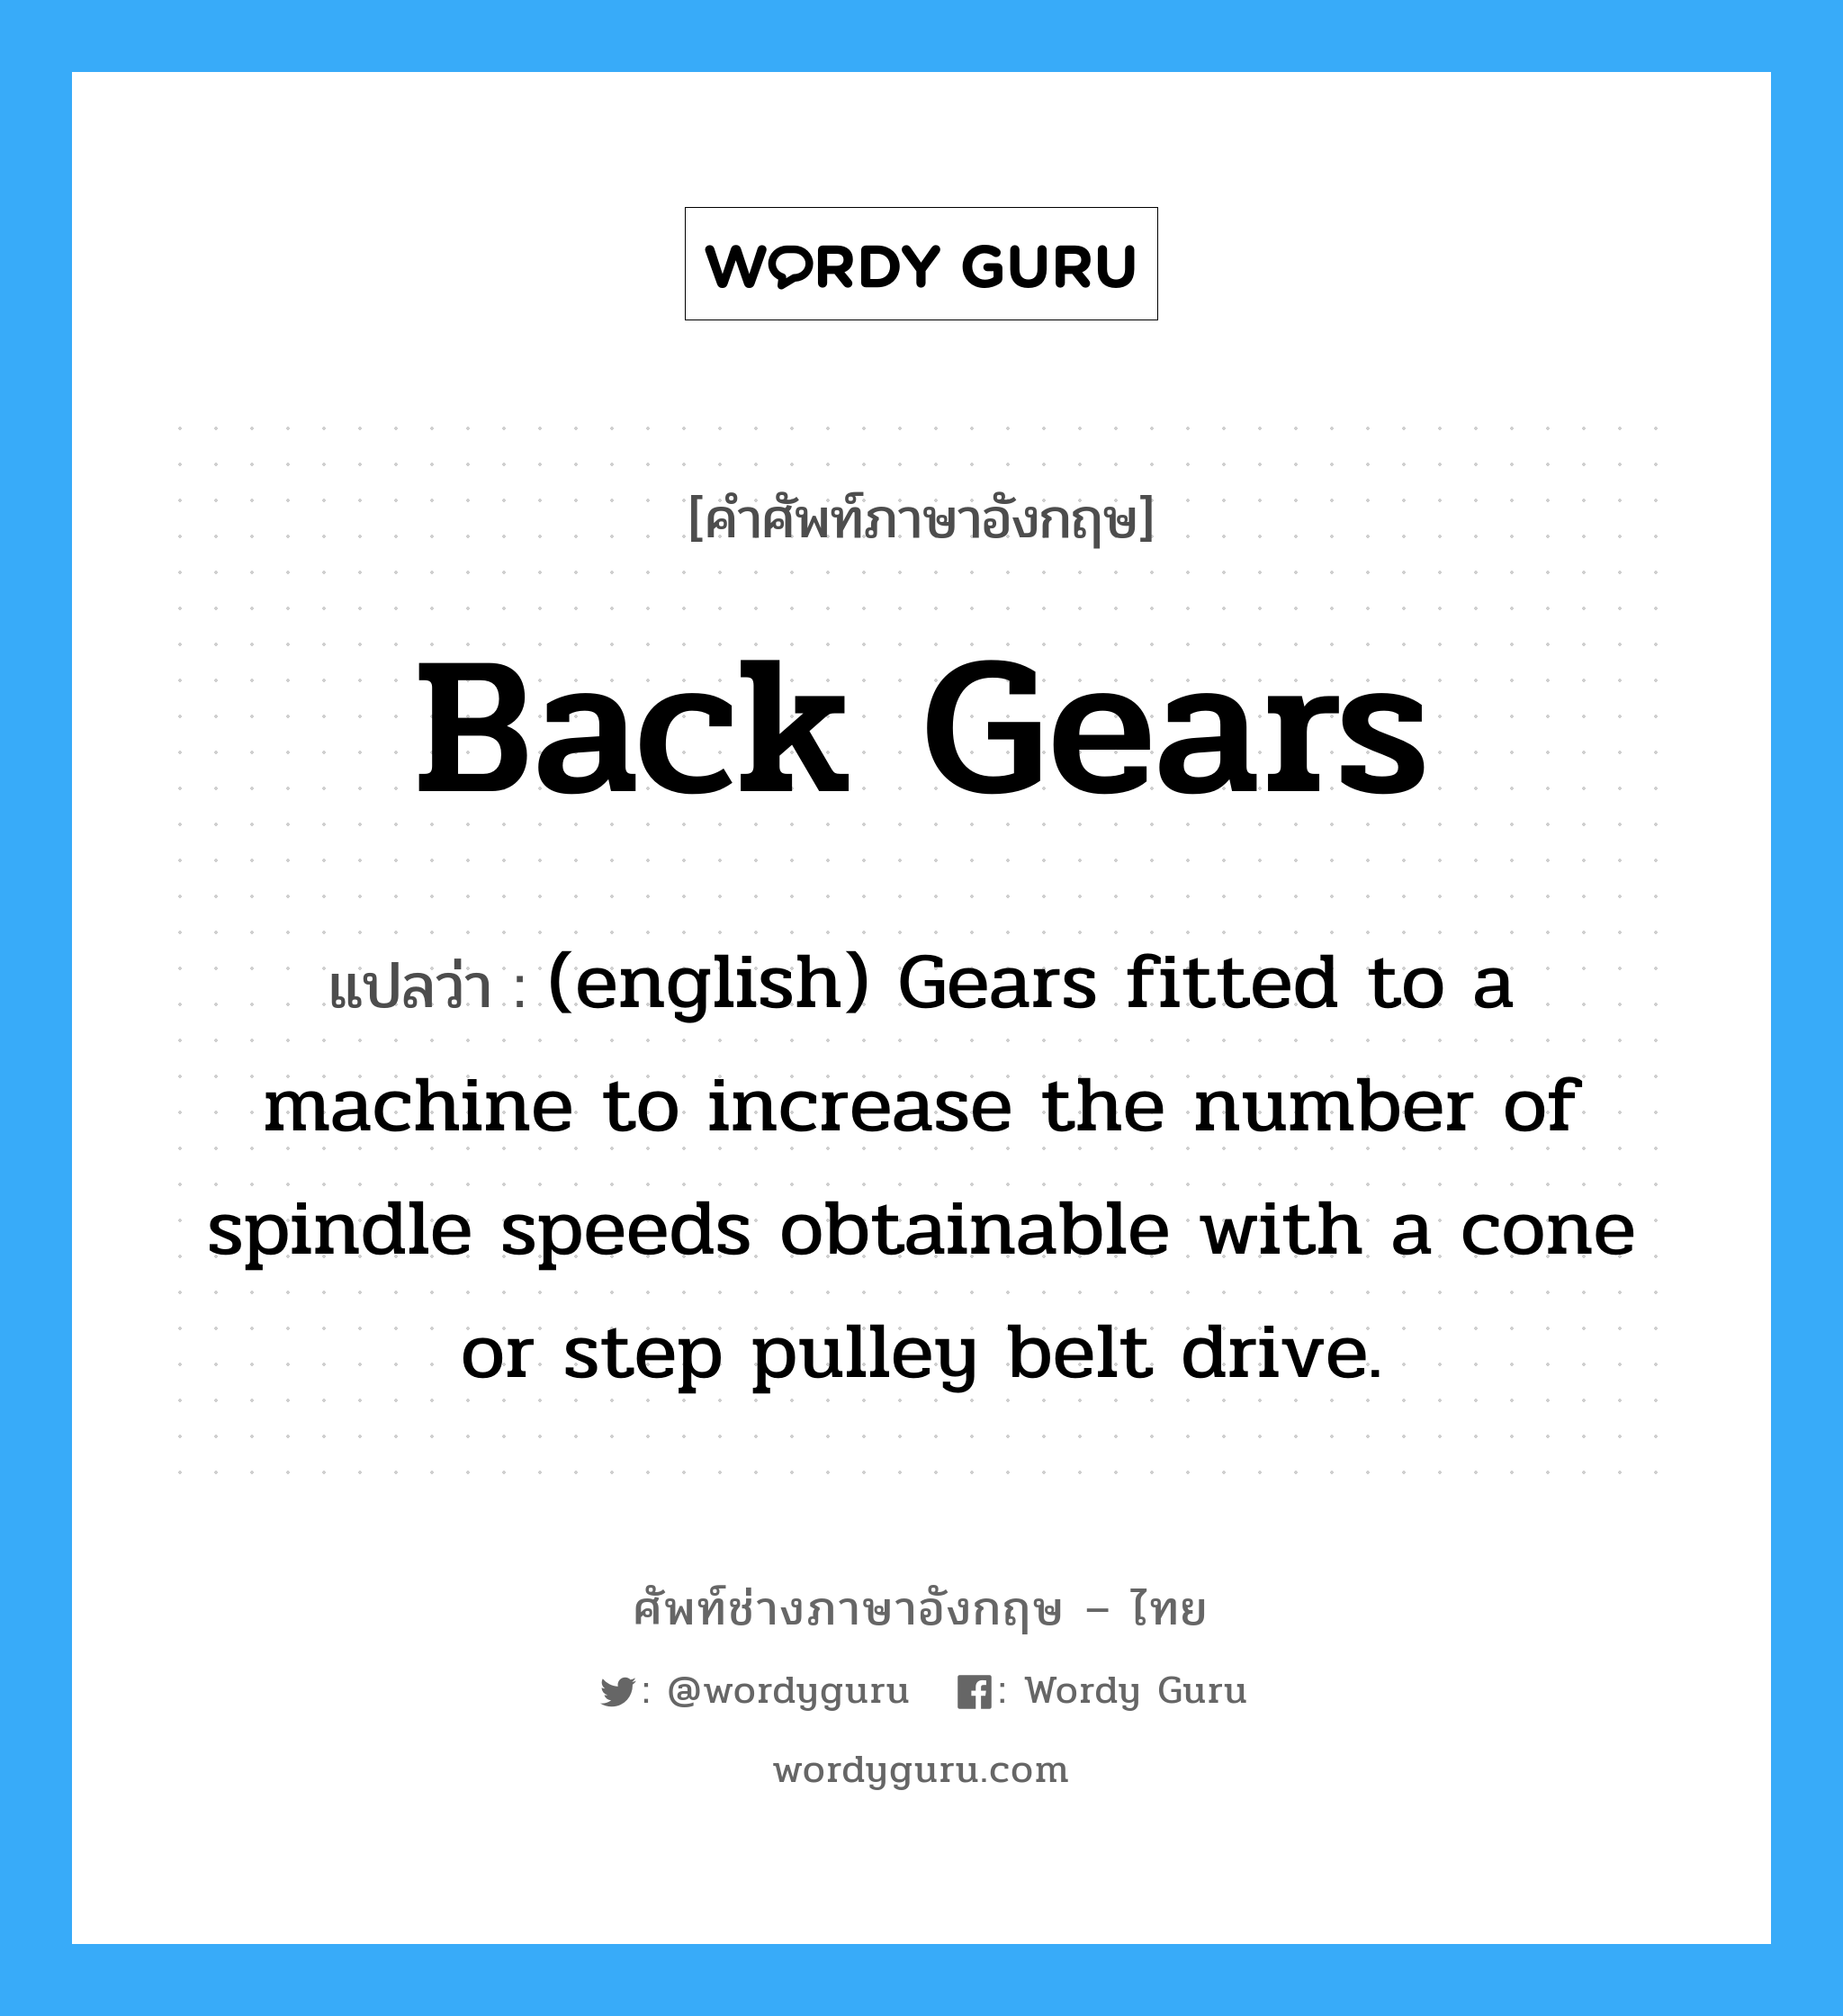 Back Gears แปลว่า?, คำศัพท์ช่างภาษาอังกฤษ - ไทย Back Gears คำศัพท์ภาษาอังกฤษ Back Gears แปลว่า (english) Gears fitted to a machine to increase the number of spindle speeds obtainable with a cone or step pulley belt drive.